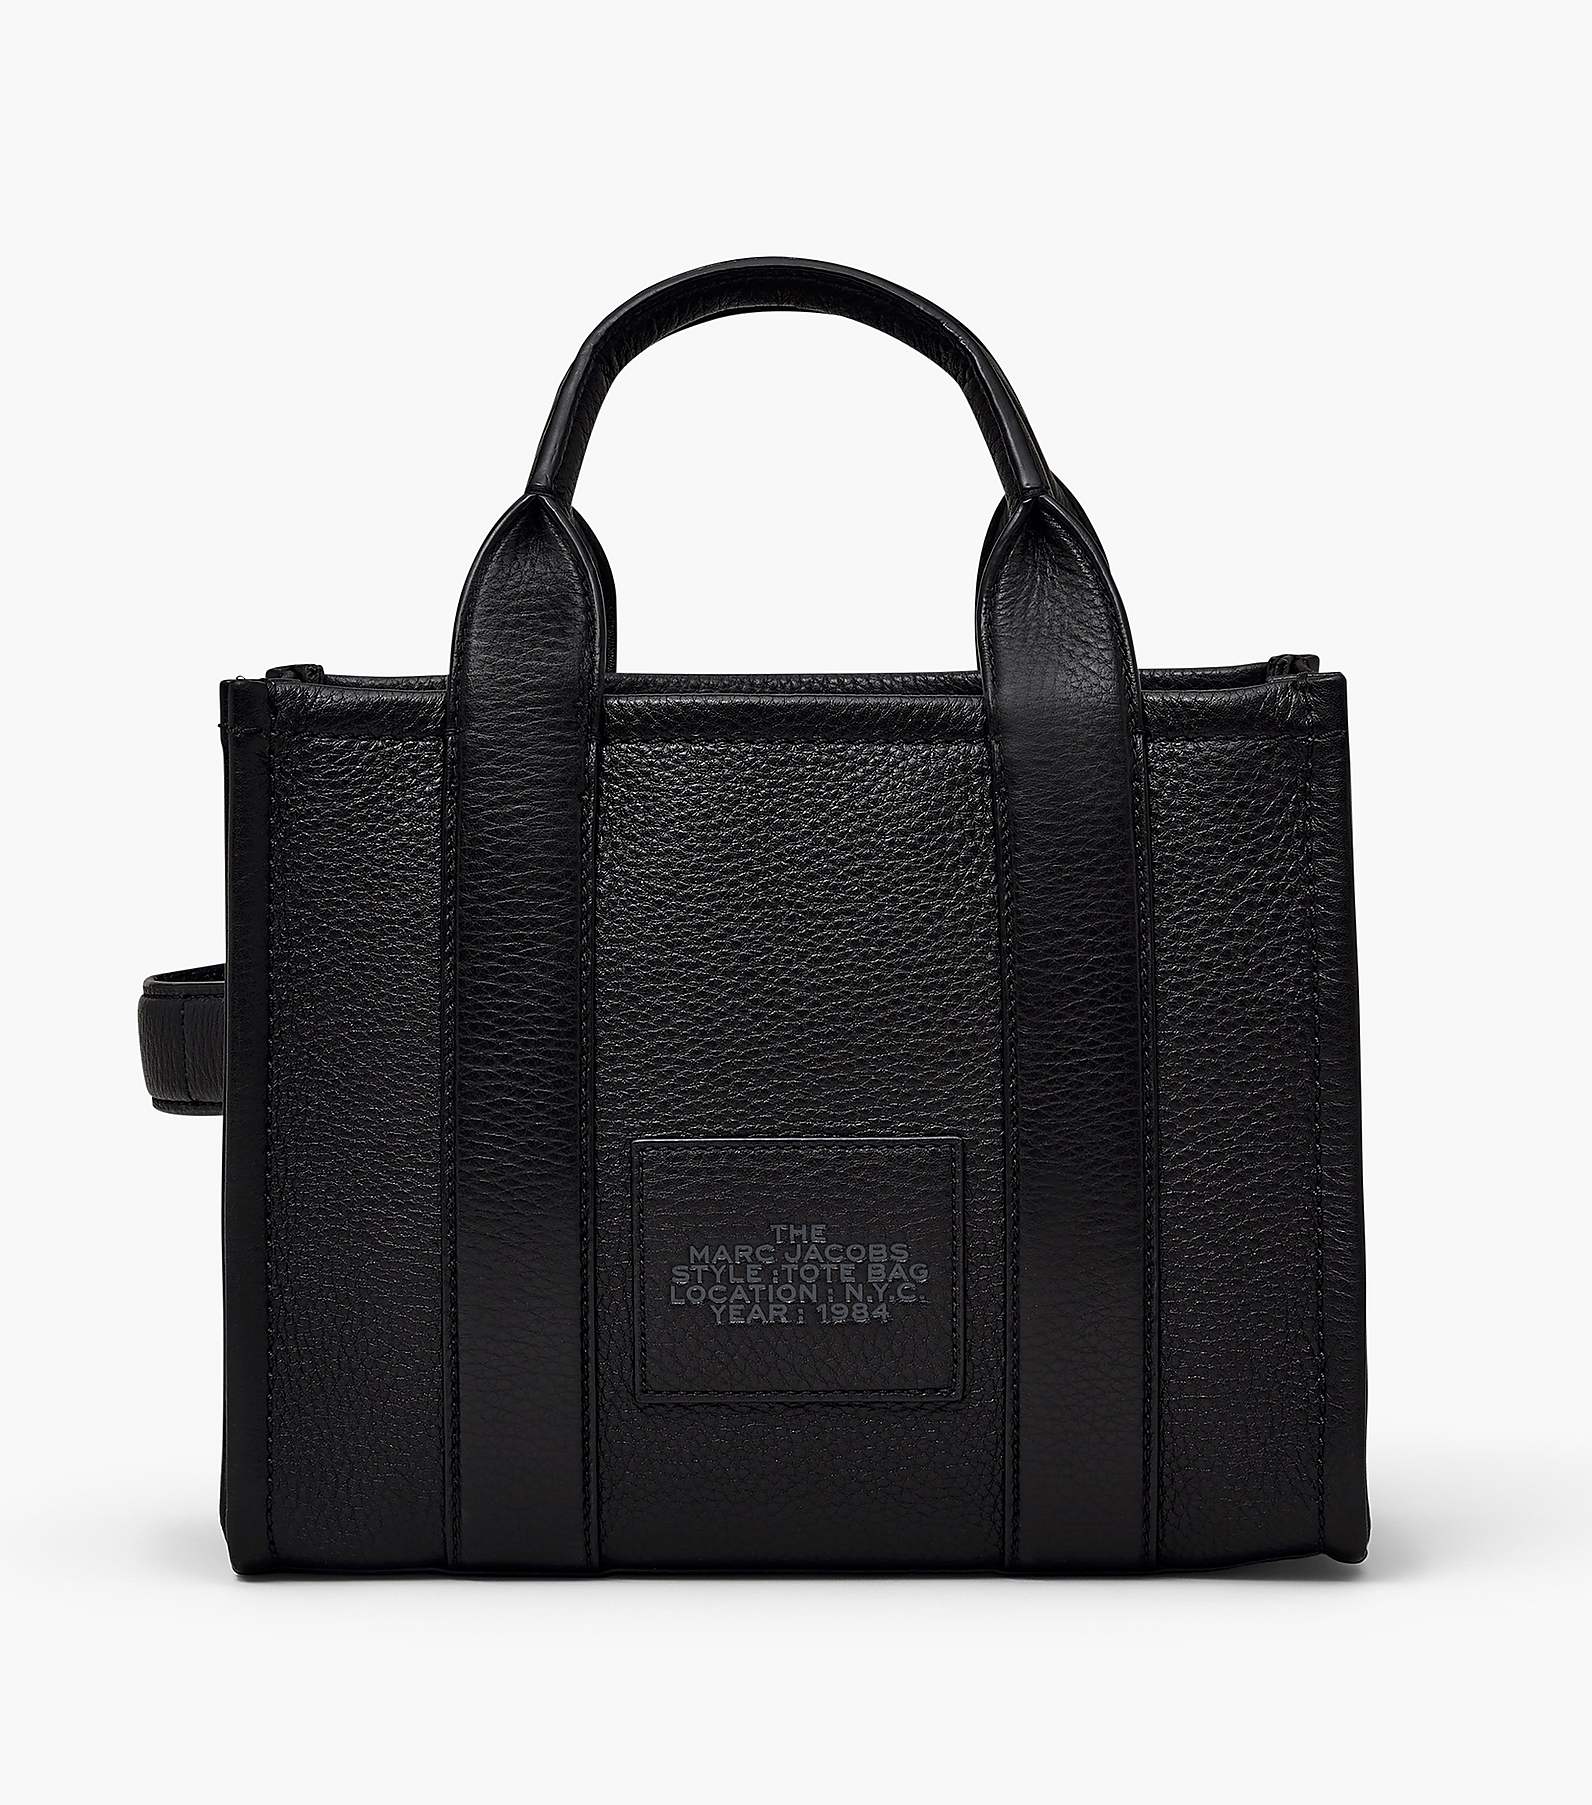 THE LEATHER SMALL TOTE BAG   マーク ジェイコブス   公式サイト